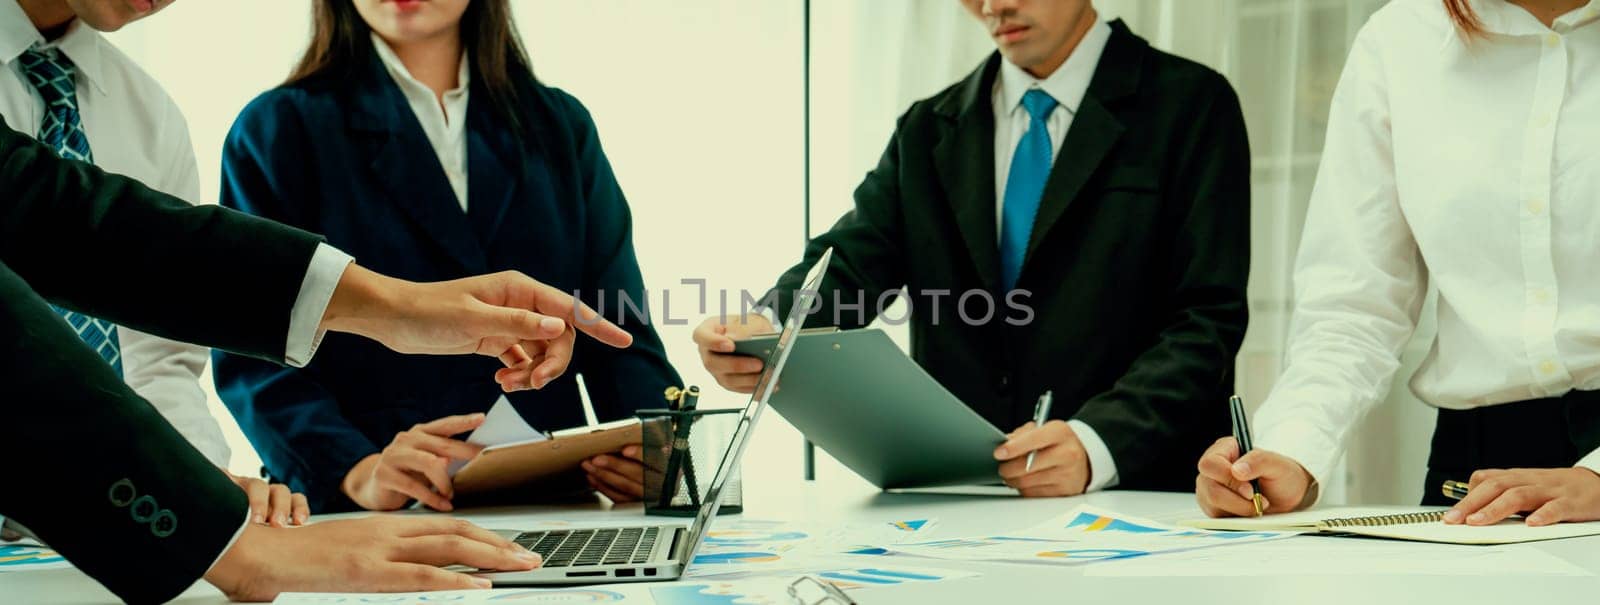 Business people in group meeting in formal attire share idea discussing report for company profit in creative workspace for start up business shot in close up view on group meeting table . Oratory .